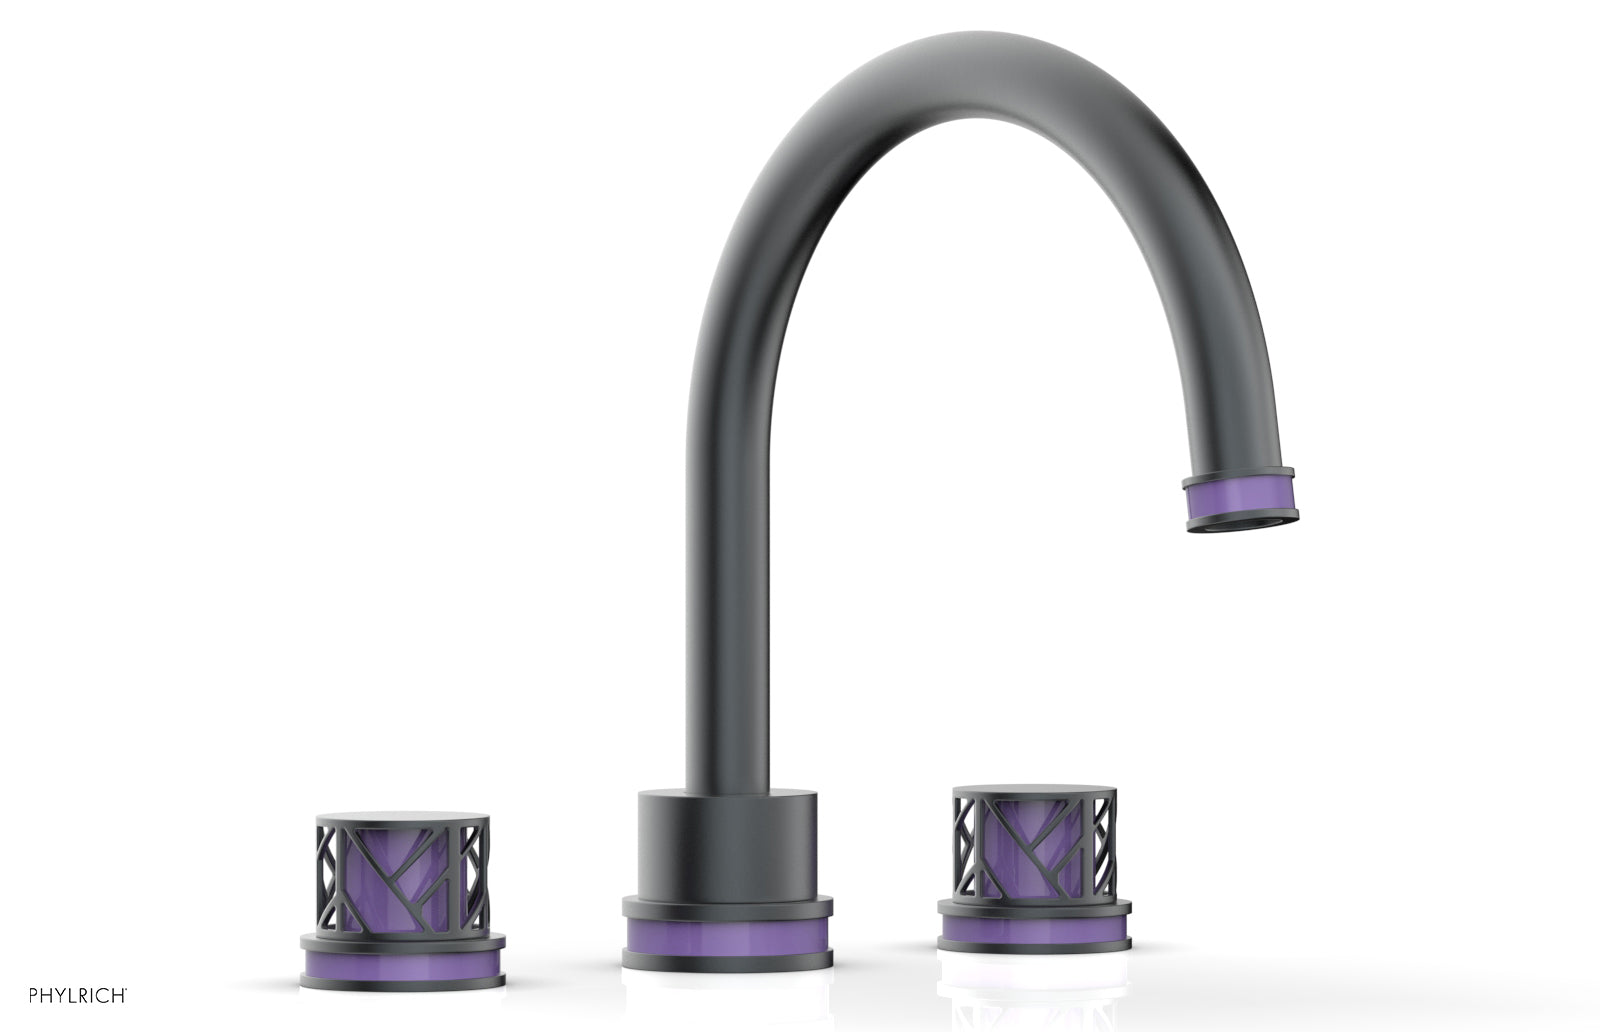 Phylrich JOLIE Deck Tub Set - Round Handles with "Purple" Accents